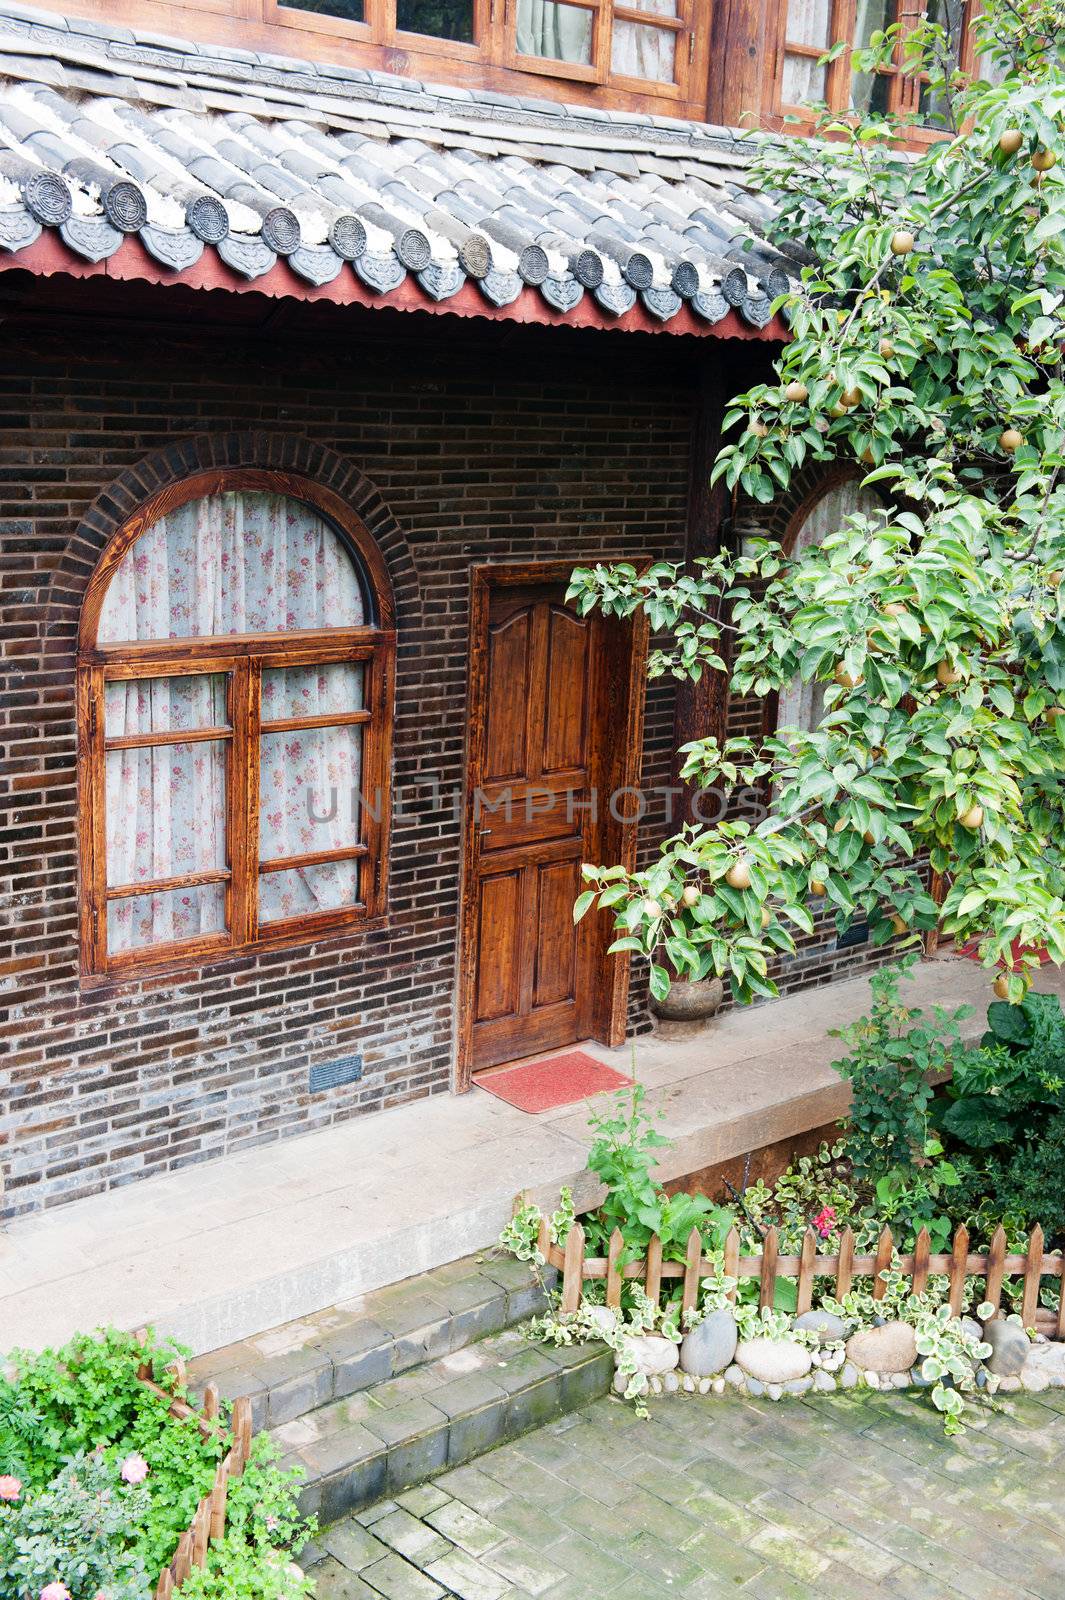 Traditional Naxi Inn in the Shuhe Old Town of Lijiang, a World Cultural Heritage